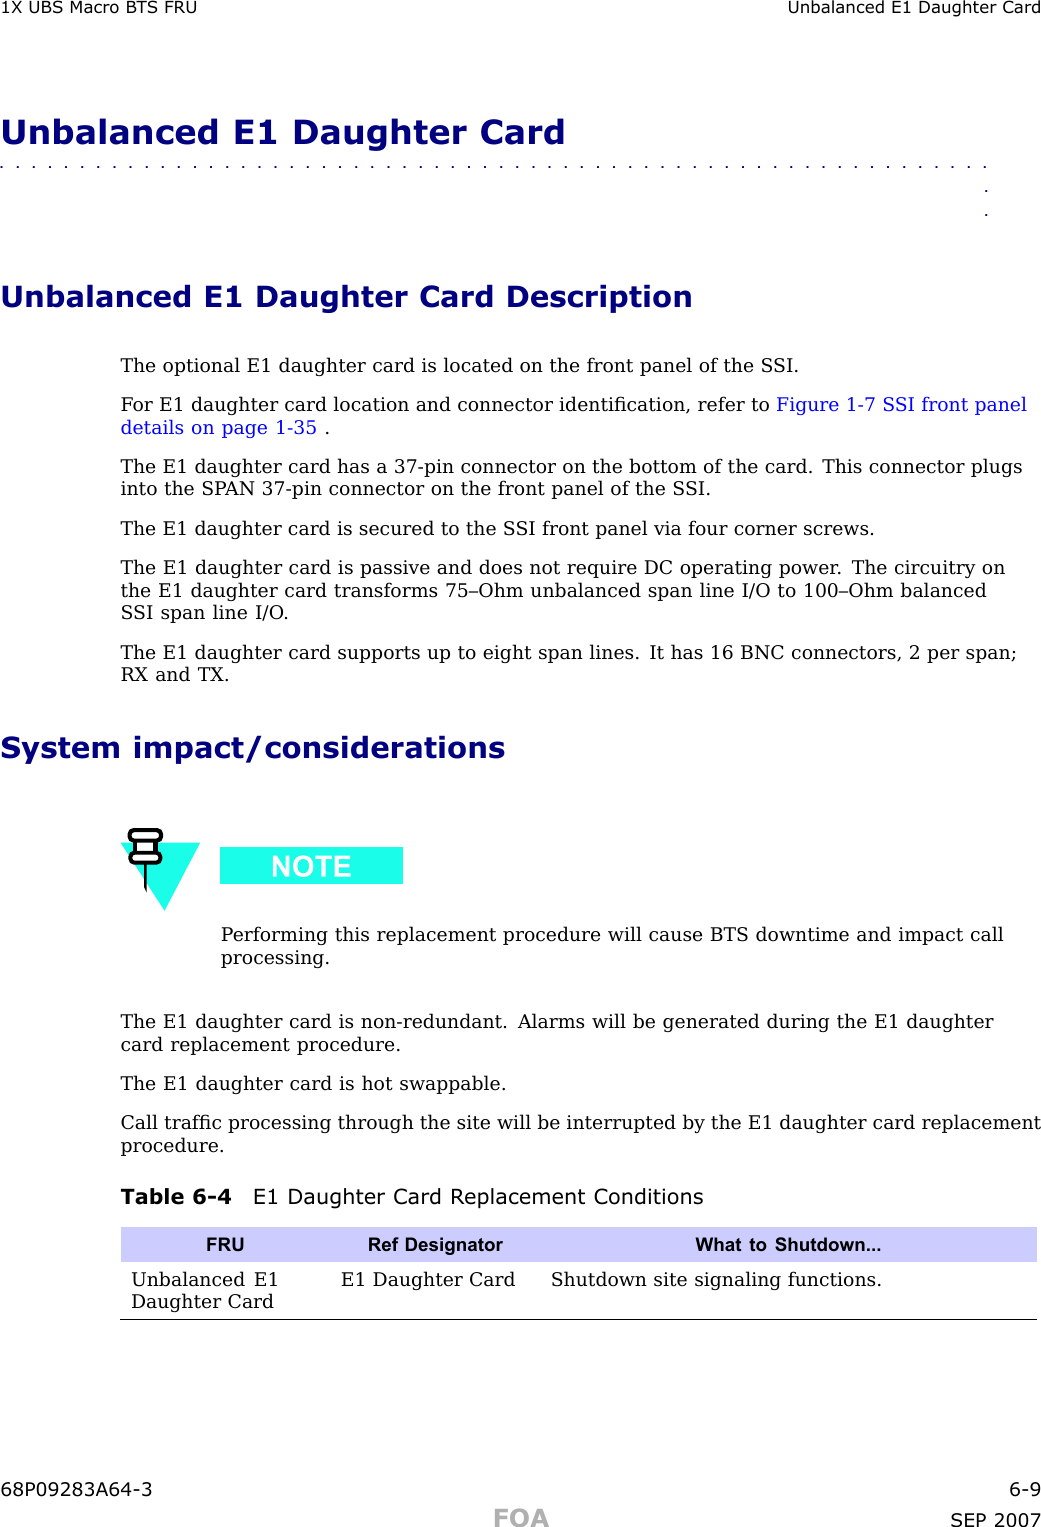 1X UBS Macro B T S FRU Unbalanced E1 Daughter CardUnbalanced E1 Daughter Card■■■■■■■■■■■■■■■■■■■■■■■■■■■■■■■■■■■■■■■■■■■■■■■■■■■■■■■■■■■■■■■■Unbalanced E1 Daughter Card DescriptionThe optional E1 daughter card is located on the front panel of the S SI.F or E1 daughter card location and connector identiﬁcation, refer to Figure 1 -7 S SI front paneldetails on page 1 - 35 .The E1 daughter card has a 37 -pin connector on the bottom of the card. This connector plugsinto the SP AN 37 -pin connector on the front panel of the S SI.The E1 daughter card is secured to the S SI front panel via four corner screws.The E1 daughter card is passive and does not require DC operating power . The circuitry onthe E1 daughter card transforms 75–Ohm unbalanced span line I/O to 100–Ohm balancedS SI span line I/O .The E1 daughter card supports up to eight span lines. It has 16 BNC connectors, 2 per span;RX and TX.System impact/considerationsP erforming this replacement procedure will cause BTS downtime and impact callprocessing.The E1 daughter card is non -redundant. Alarms will be generated during the E1 daughtercard replacement procedure.The E1 daughter card is hot swappable.Call trafﬁc processing through the site will be interrupted by the E1 daughter card replacementprocedure.Table 6 -4 E1 Daughter Card R eplacement ConditionsFRURef Designator What to Shutdown...Unbalanced E1Daughter CardE1 Daughter Card Shutdown site signaling functions.68P09283A64 -3 6 -9FOA SEP 2007